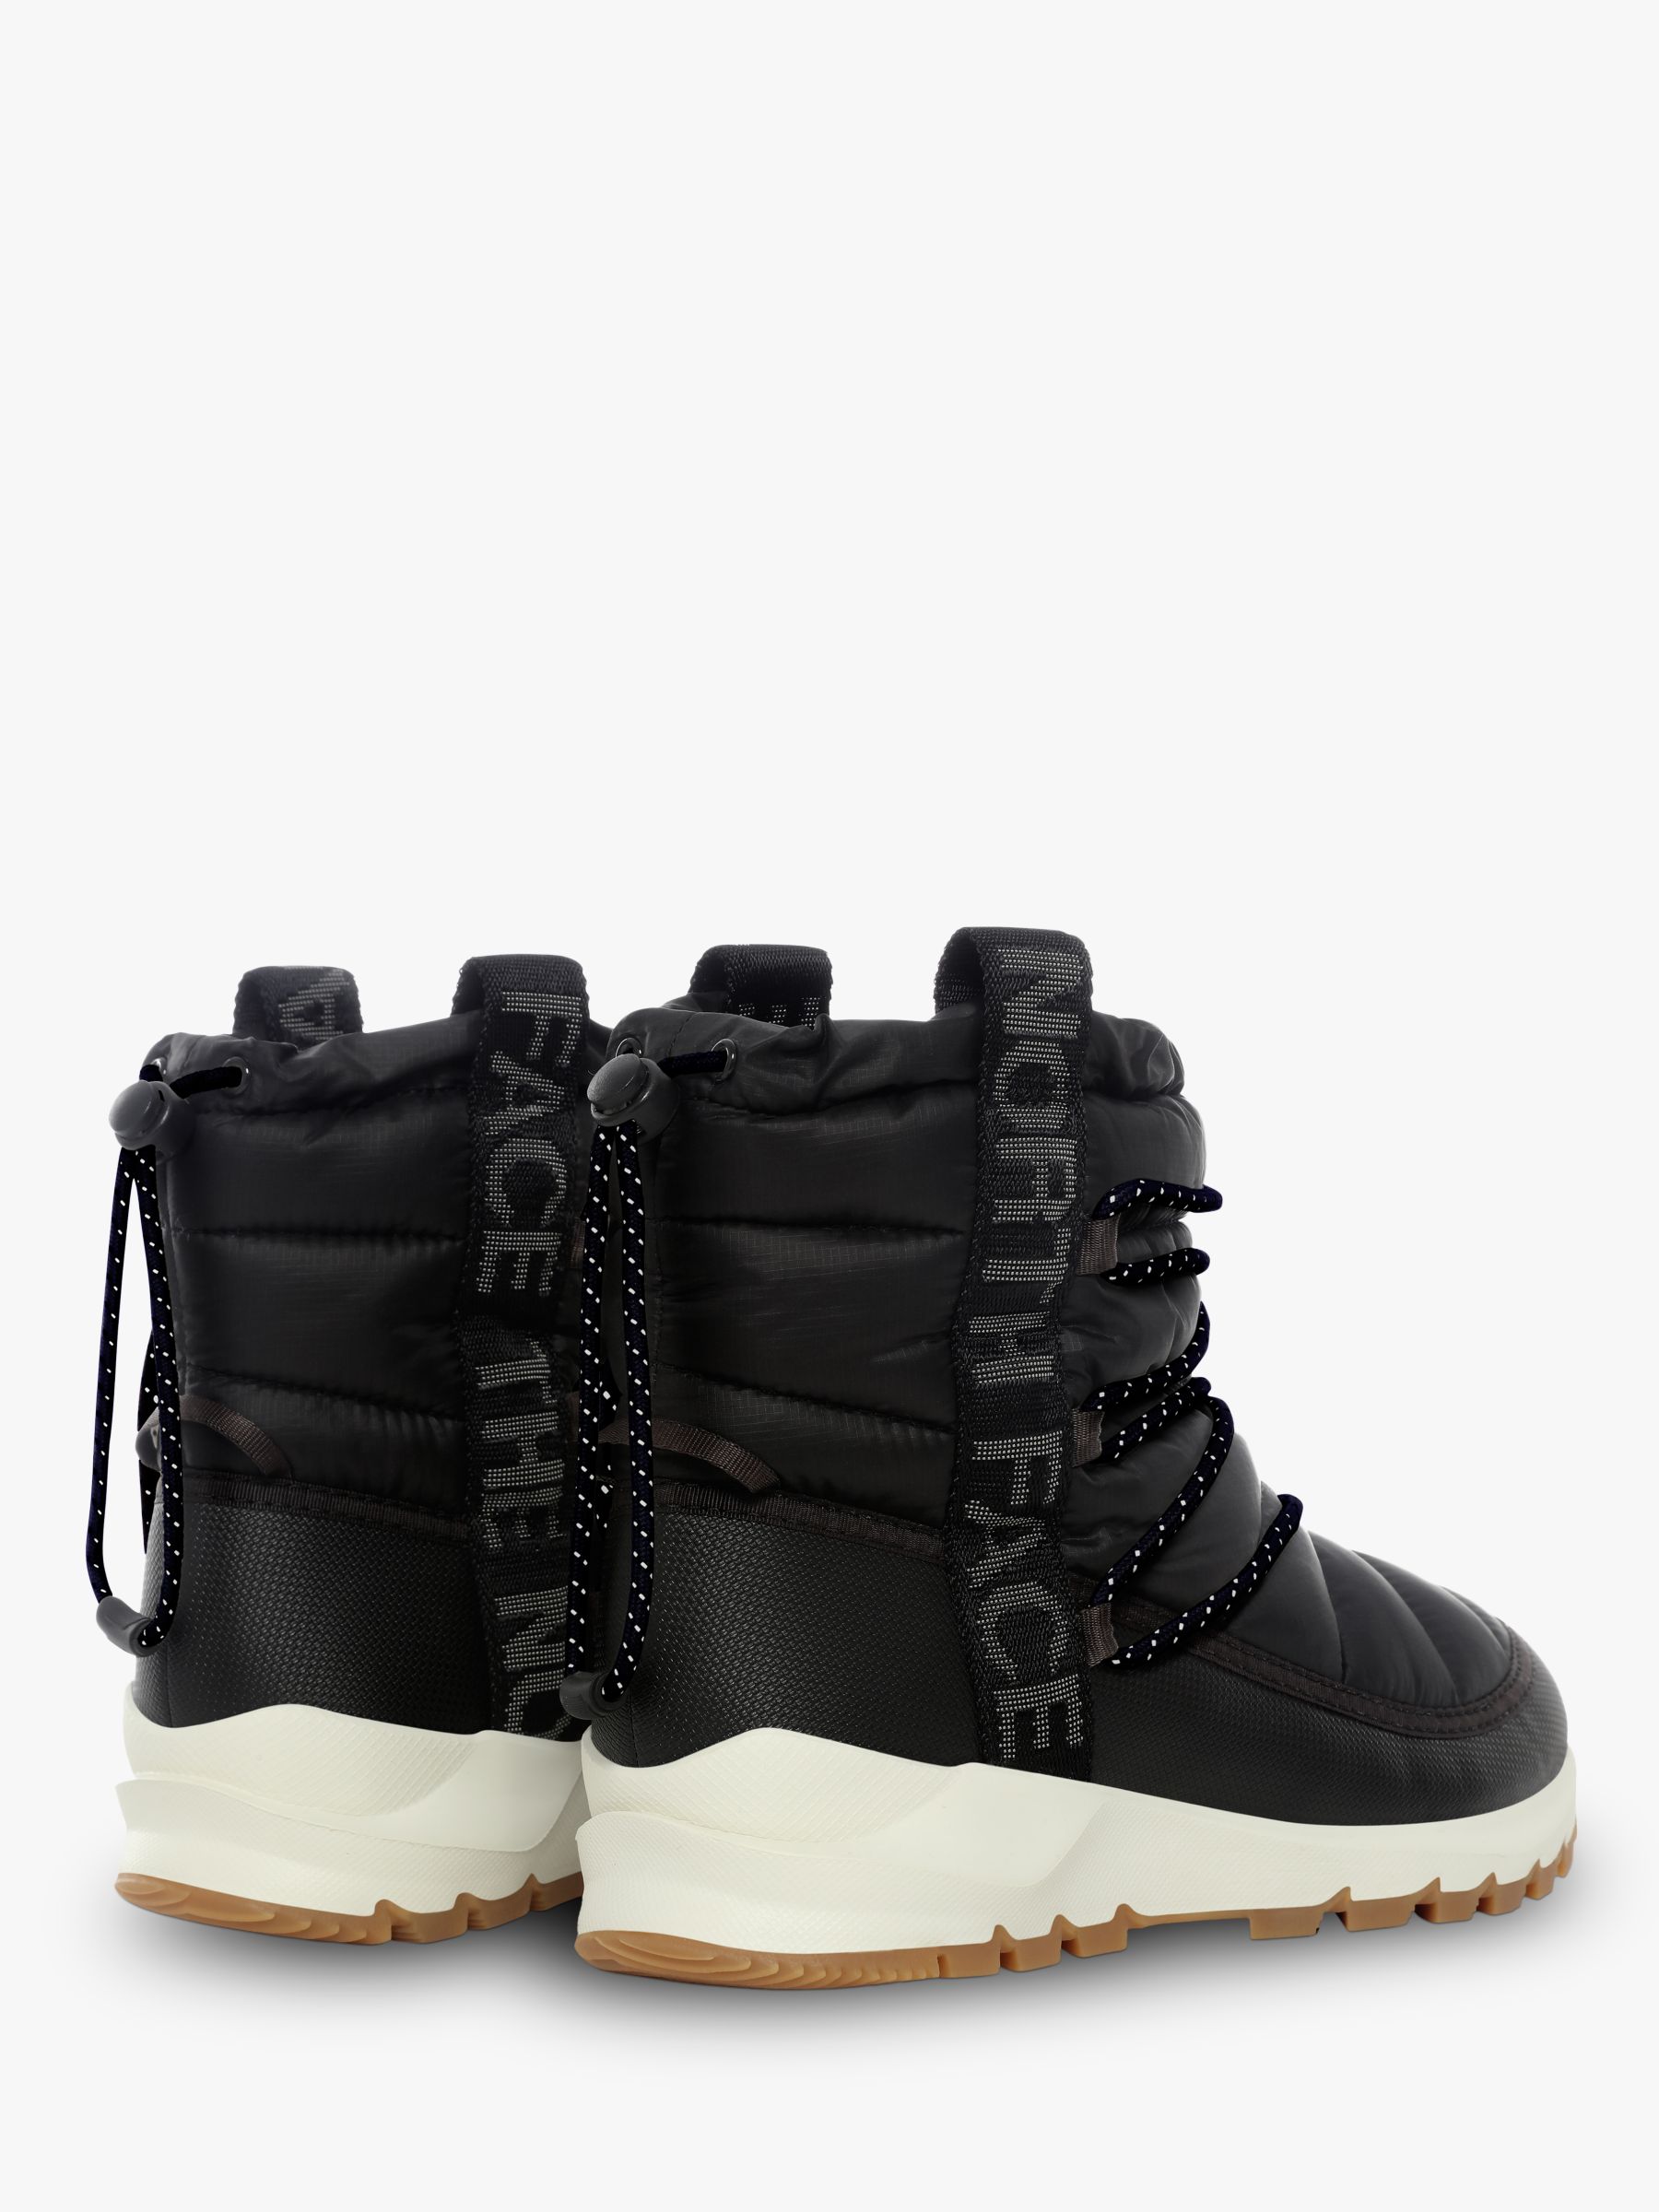 The North Face Thermoball Women S Walking Boots Tnf Black Whisper White At John Lewis Partners